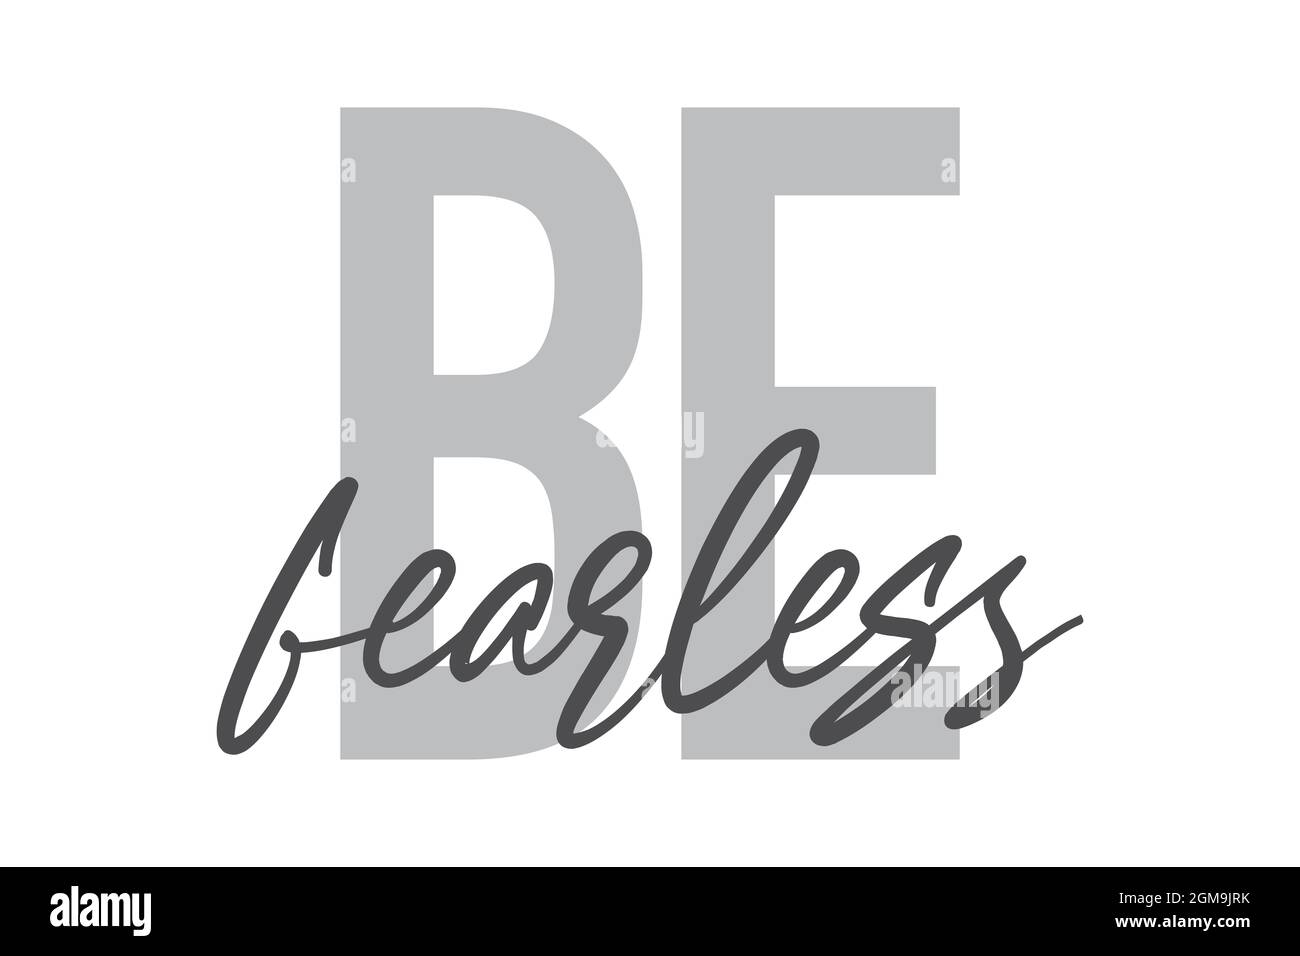 Modern, simple, minimal typographic design of a saying 'Be Fearless' in tones of grey color. Cool, urban, trendy and playful graphic vector art with h Stock Photo